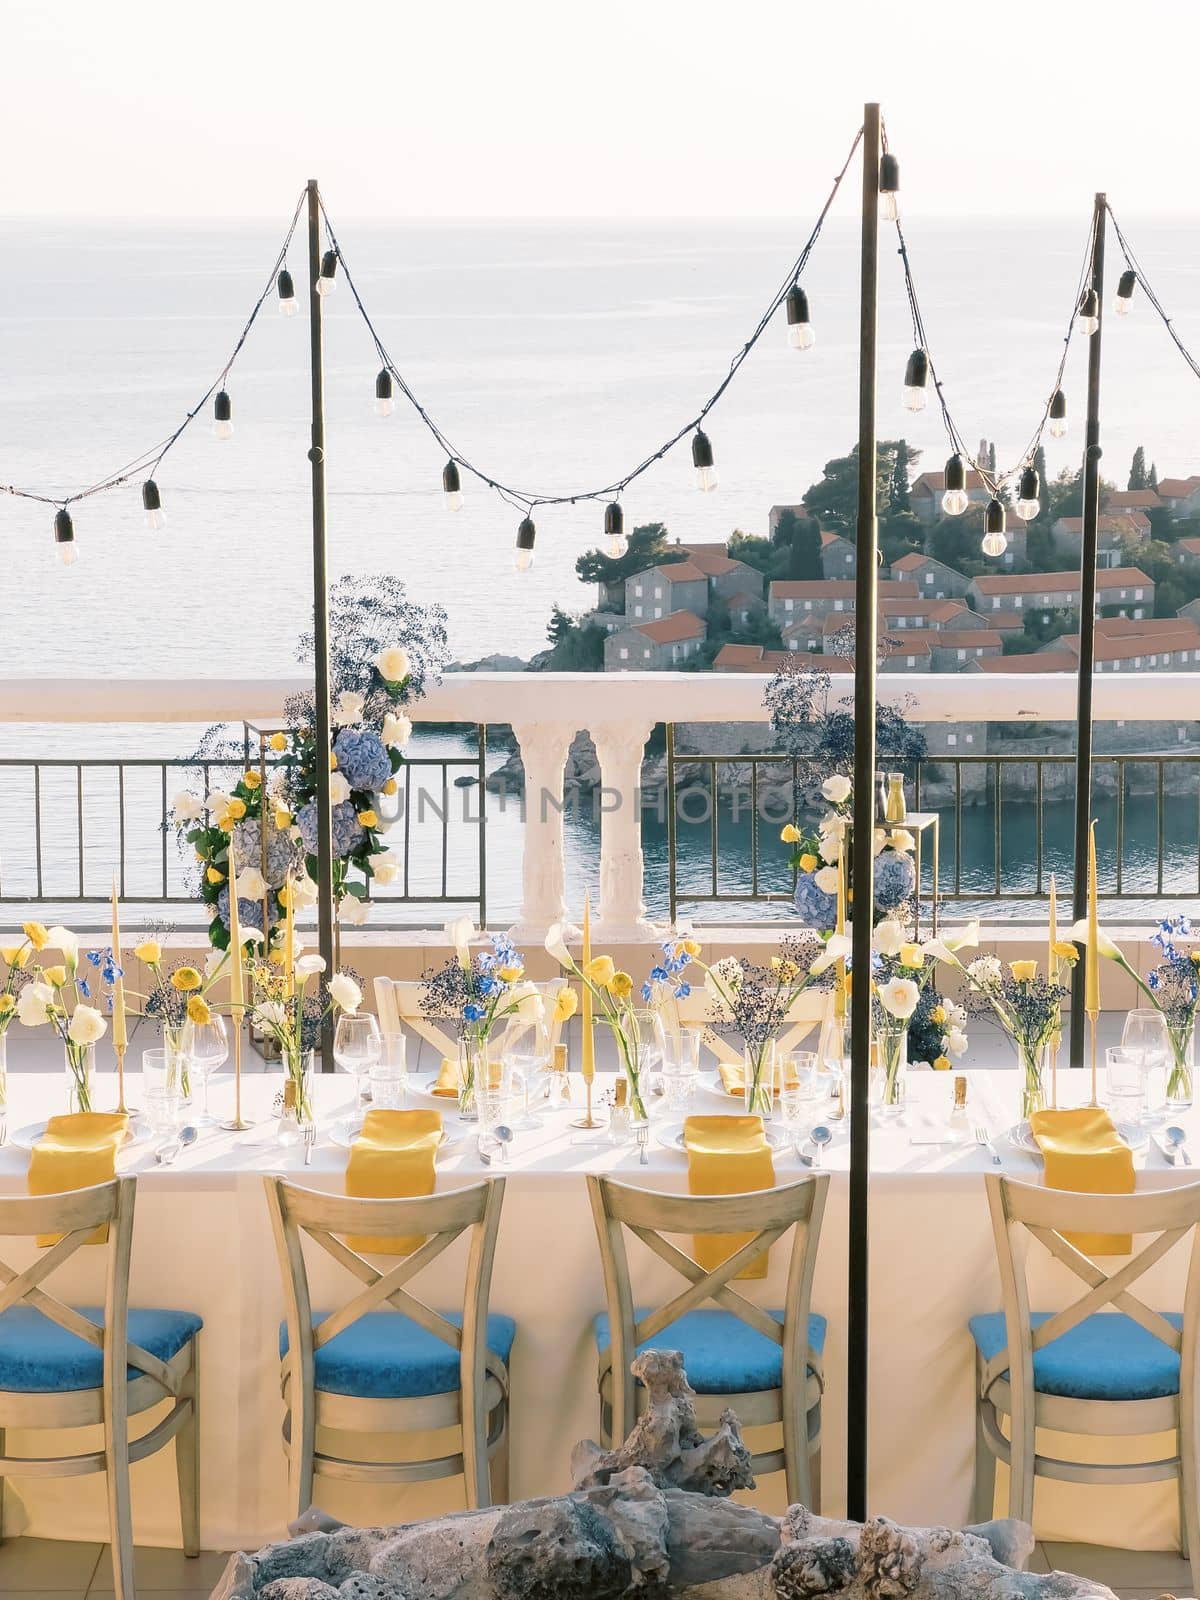 Set table on the terrace of a restaurant overlooking the island of Sveti Stefan. High quality photo